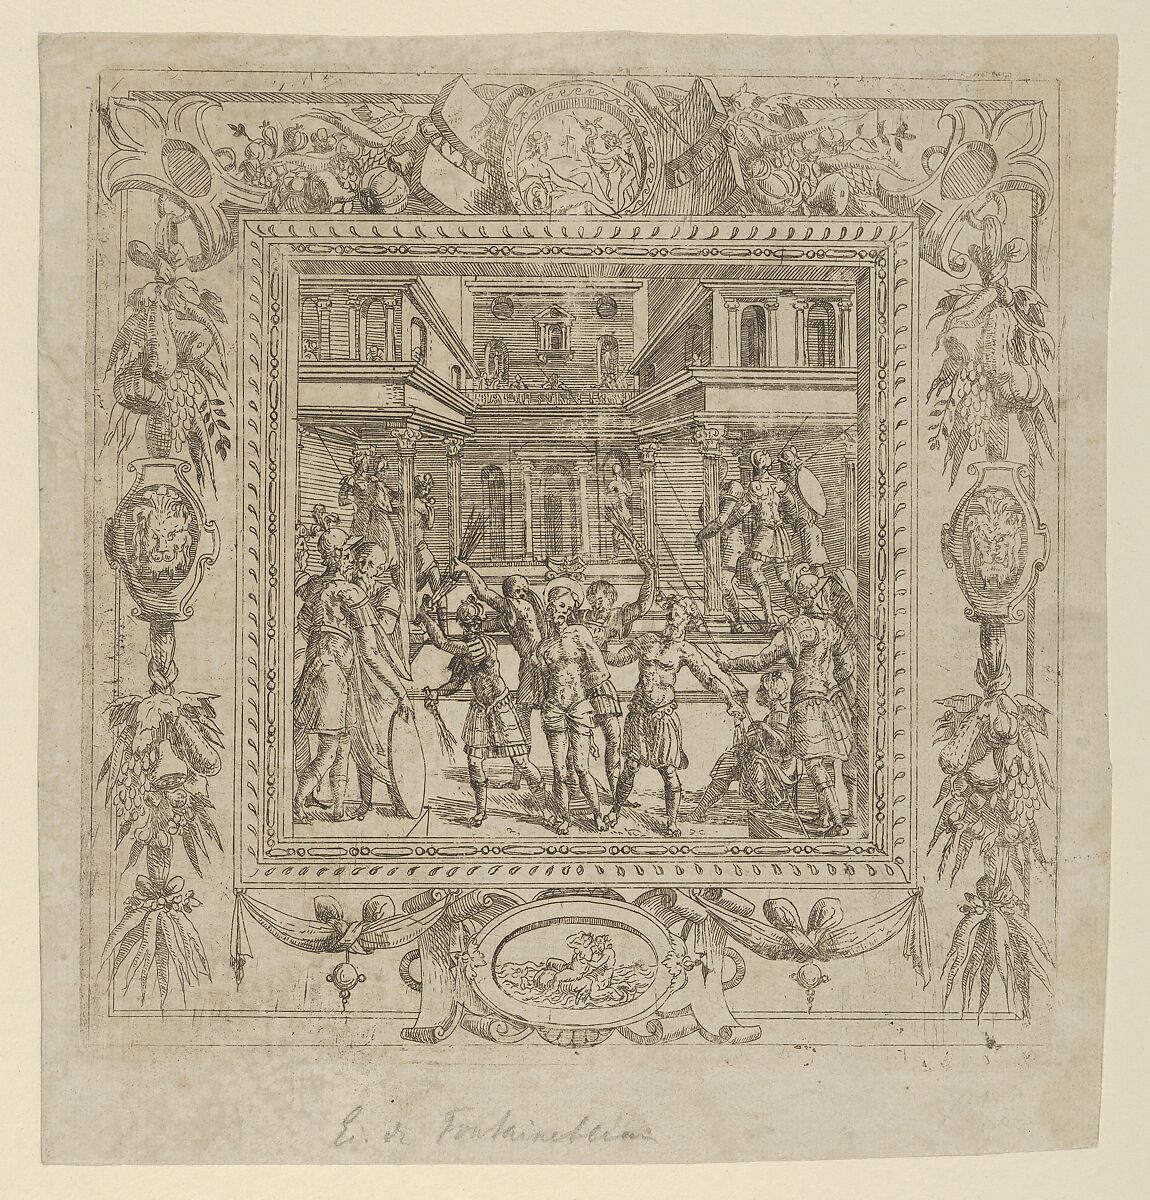 Flagellation of Christ in an ornate Frame, Anonymous, French, School of Fontainebleau, 16th century, Etching 